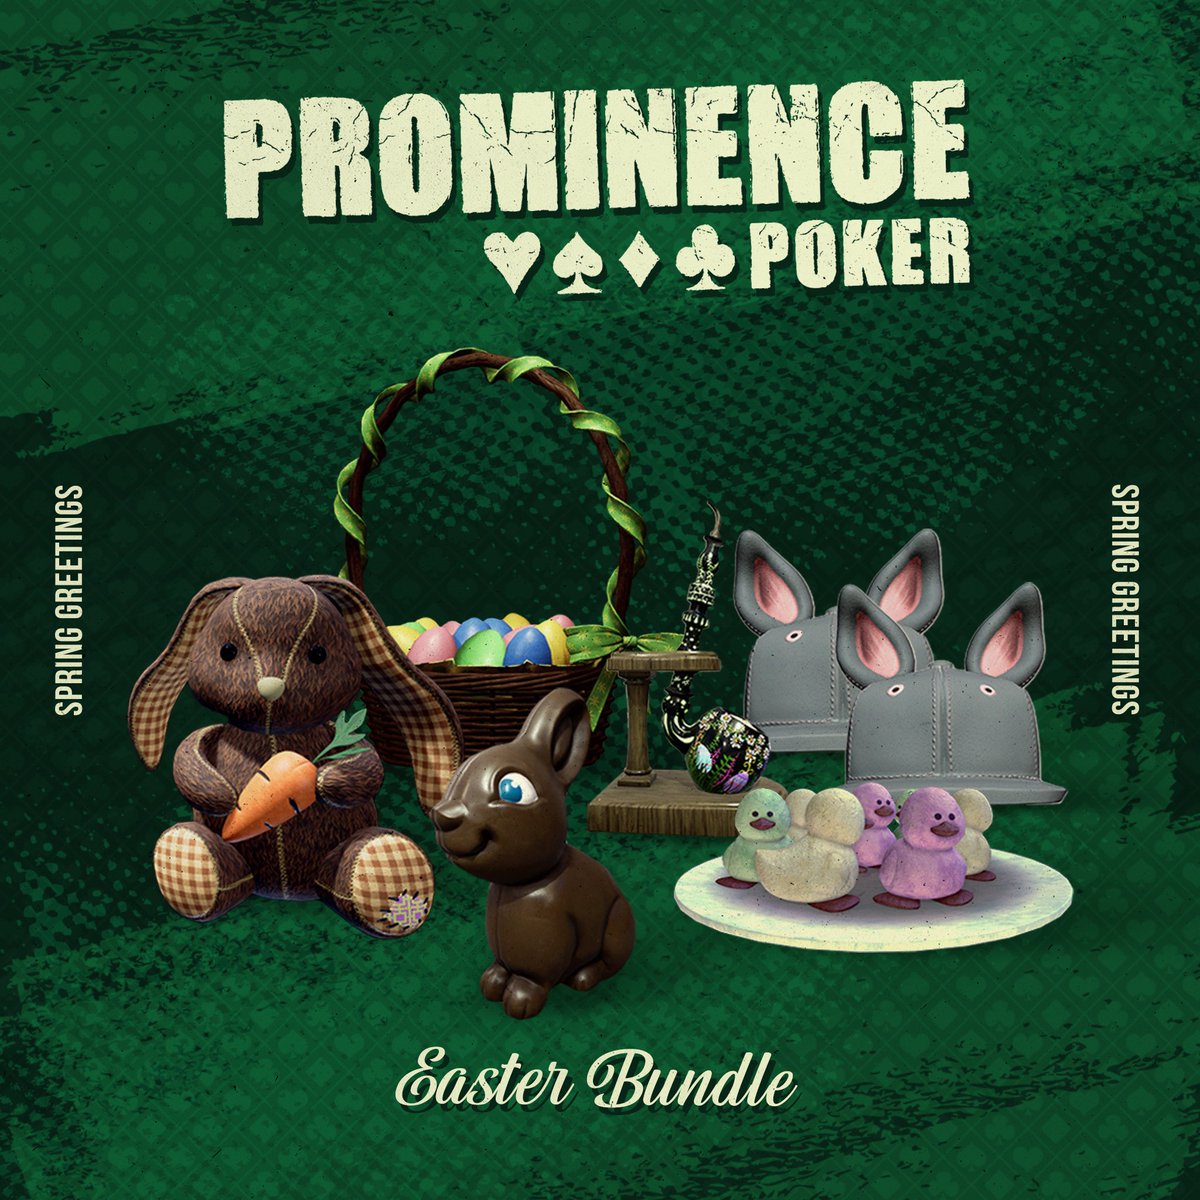 Hop into Prominence Poker this weekend and snatch up the egg-cellent Easter Bundle! Set an example for somebunny out there — don't let these limited-time goodies pass you by! 🐰🃏